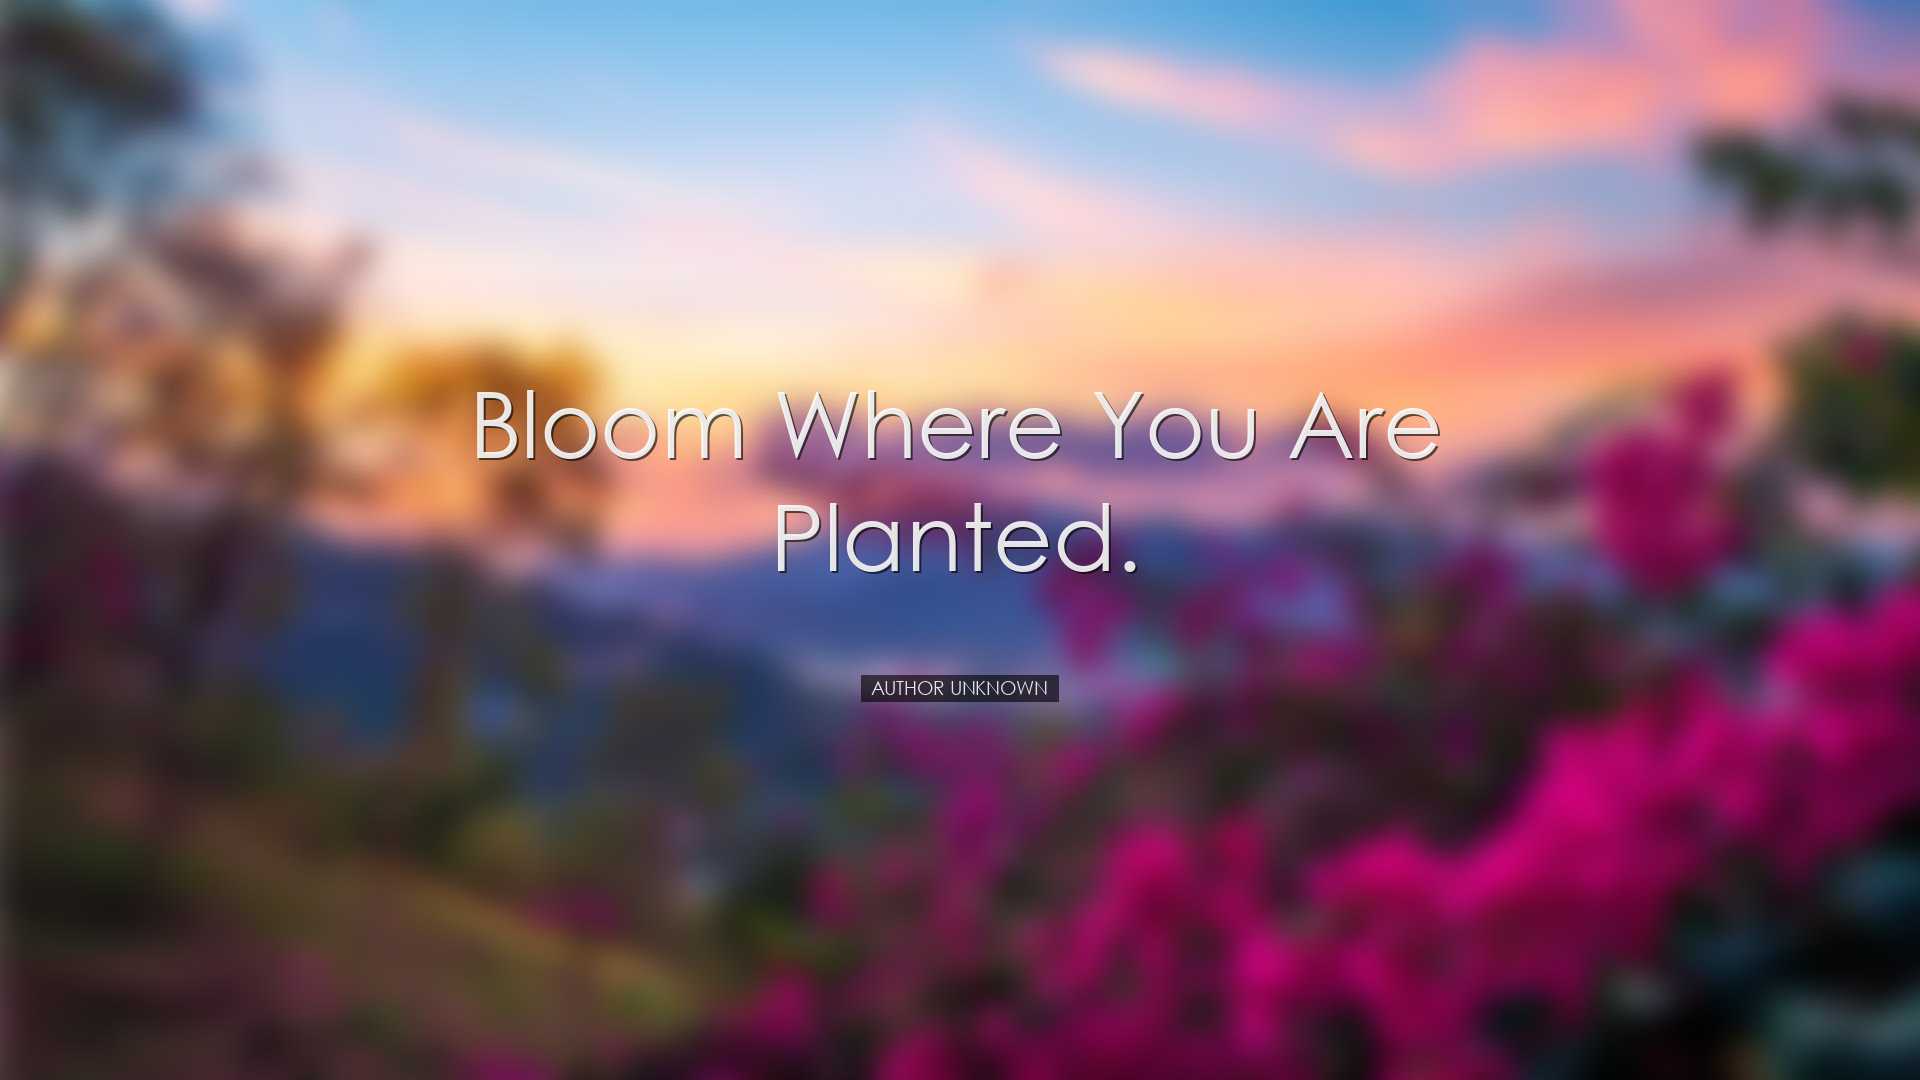 Bloom where you are planted. - Author Unknown